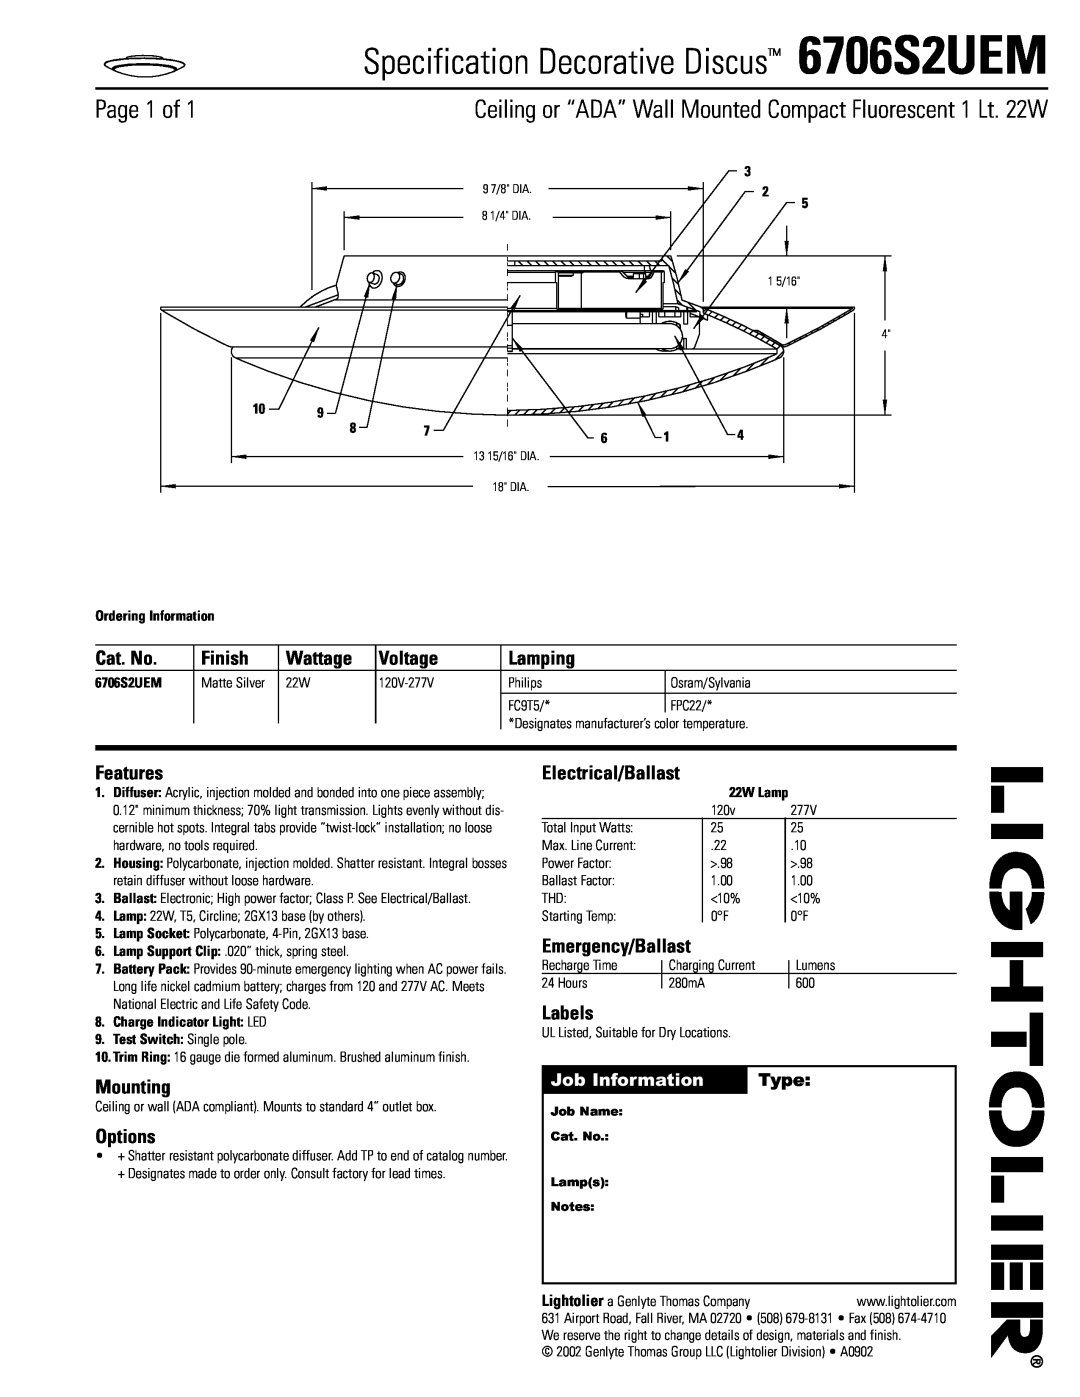 Lightolier manual Specification Decorative Discus 6706S2UEM, Page 1 of, Cat. No, Finish, Wattage, Voltage, Lamping 